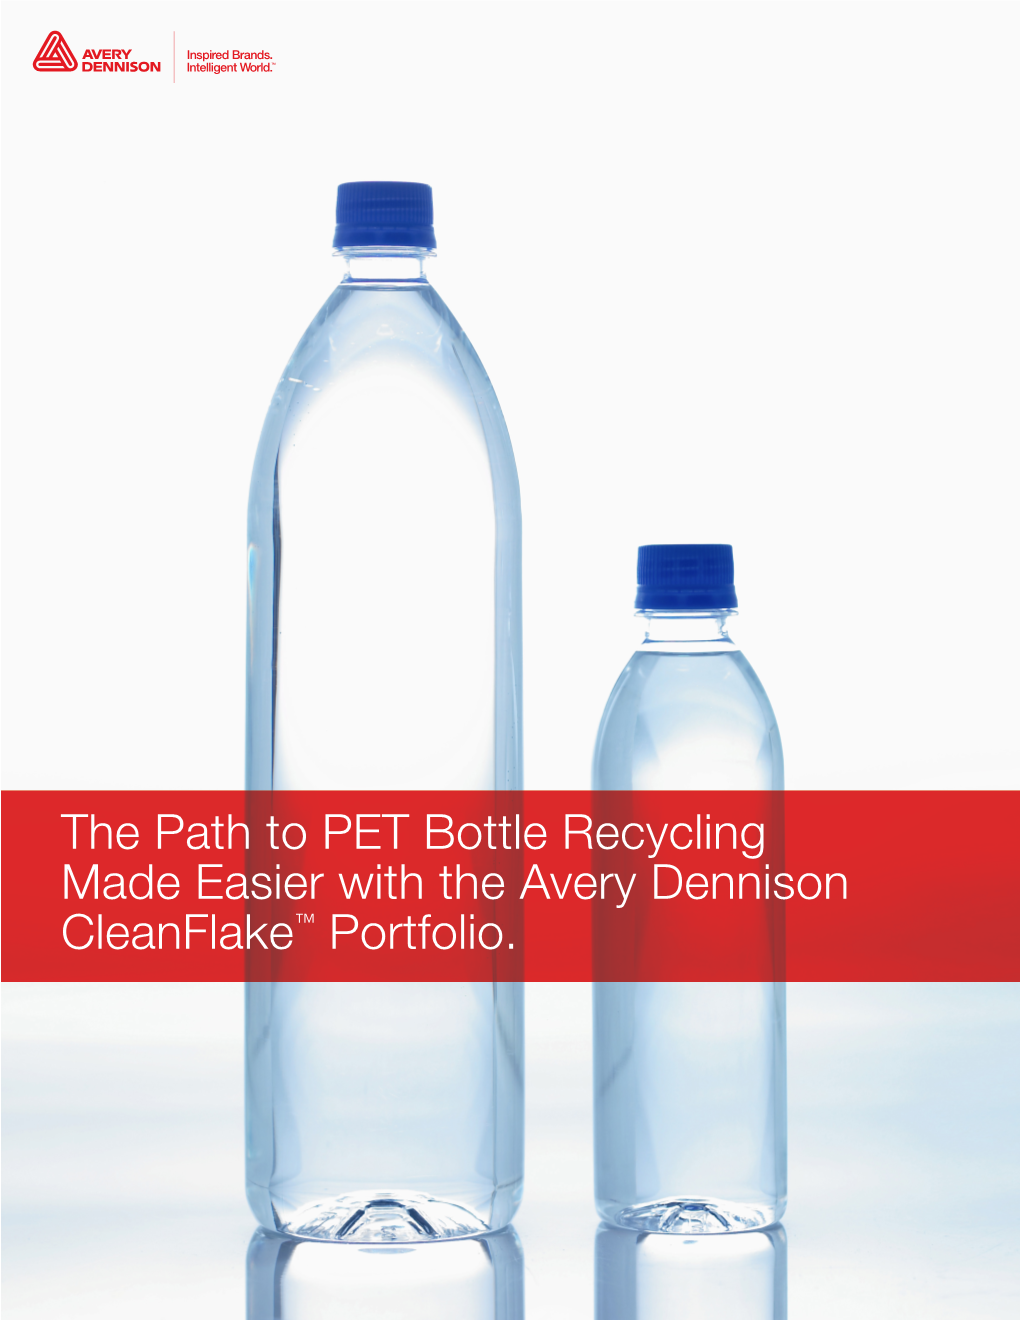 The Path to PET Bottle Recycling Made Easier with the Avery Dennison Cleanflake™ Portfolio. Label Material Advances Allow Brand Owners to Improve Recyclability